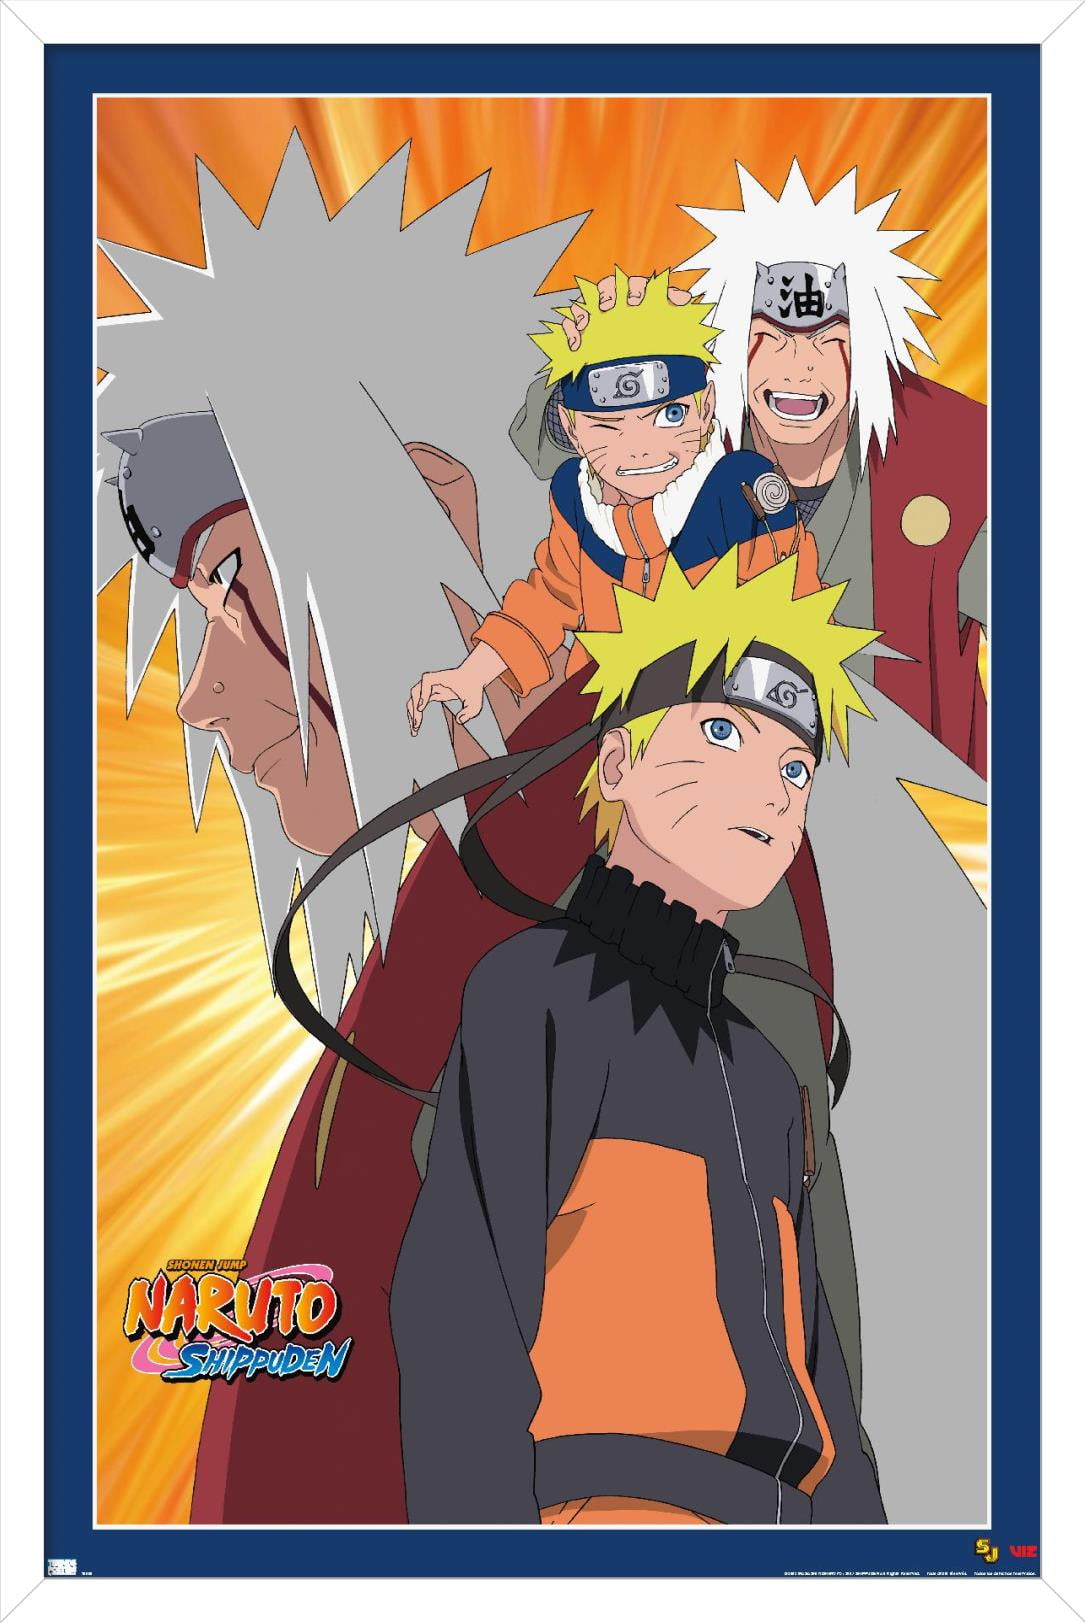 NARUTO SHIPPUDEN Framed print Adults and children